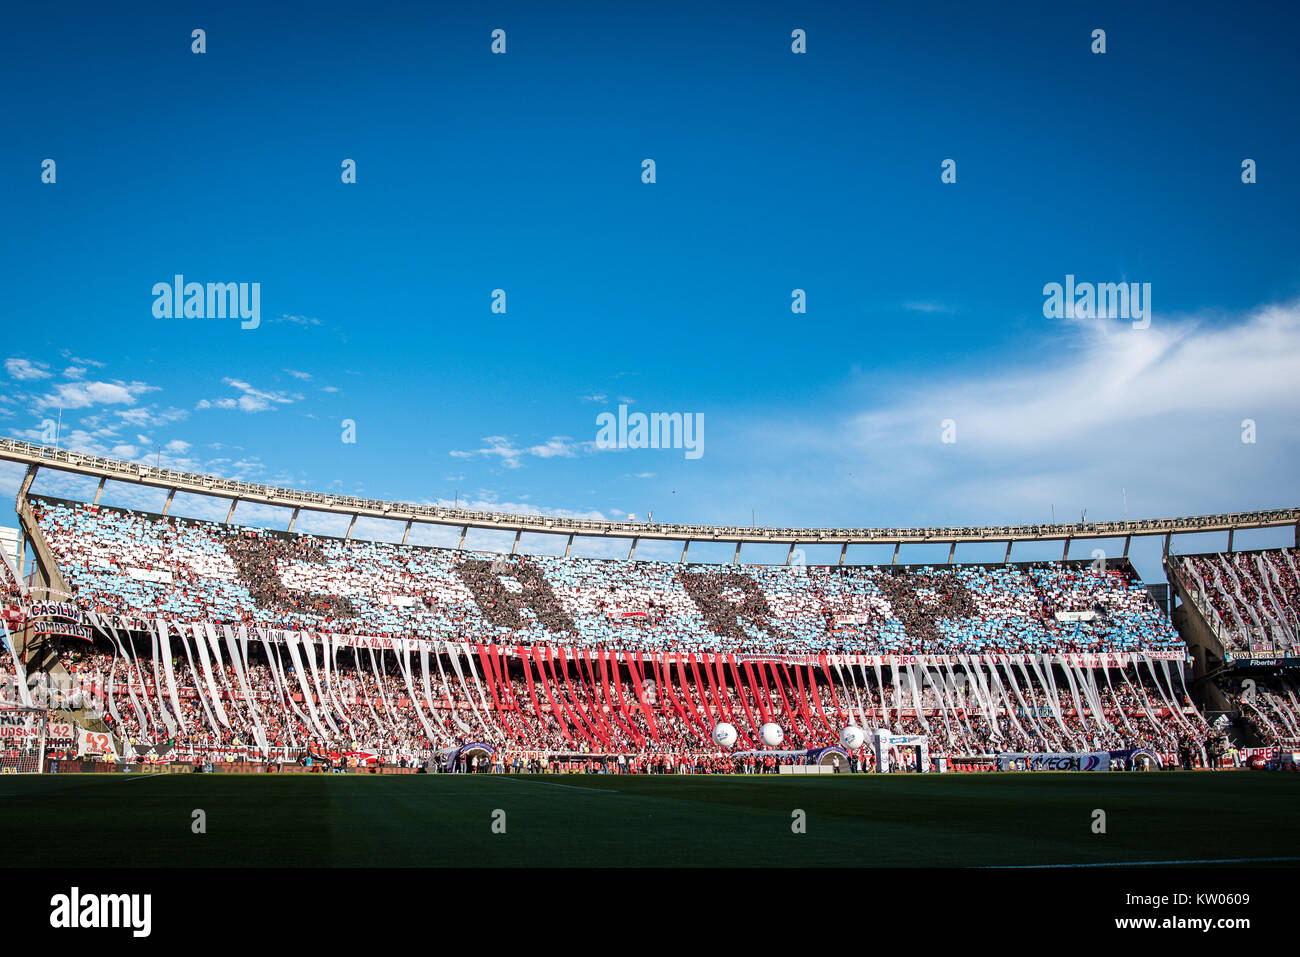 Argentina, Buenos Aires EL Monumental stadium Superlasicco match between River Plate and Boca Juniors , fans tifo display during the game Stock Photo